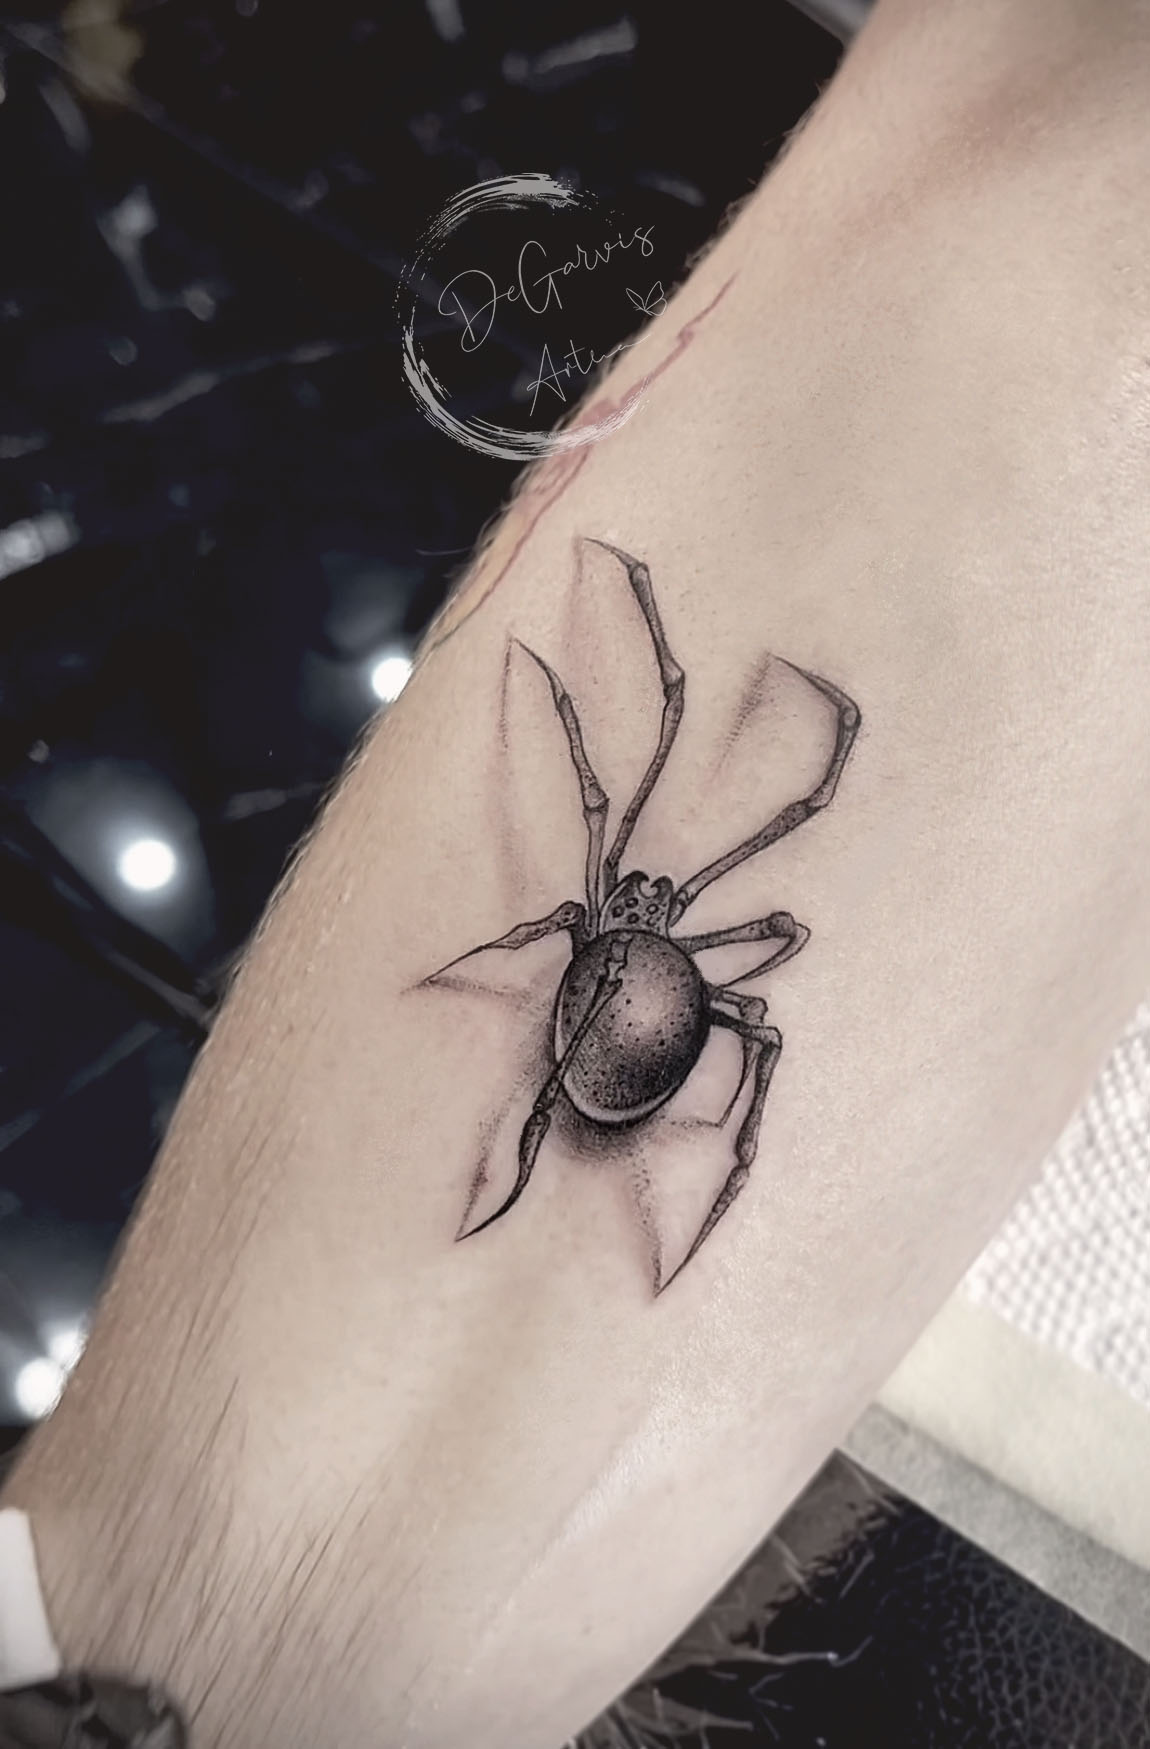 Spider tattoo located on the ankle microrealistic